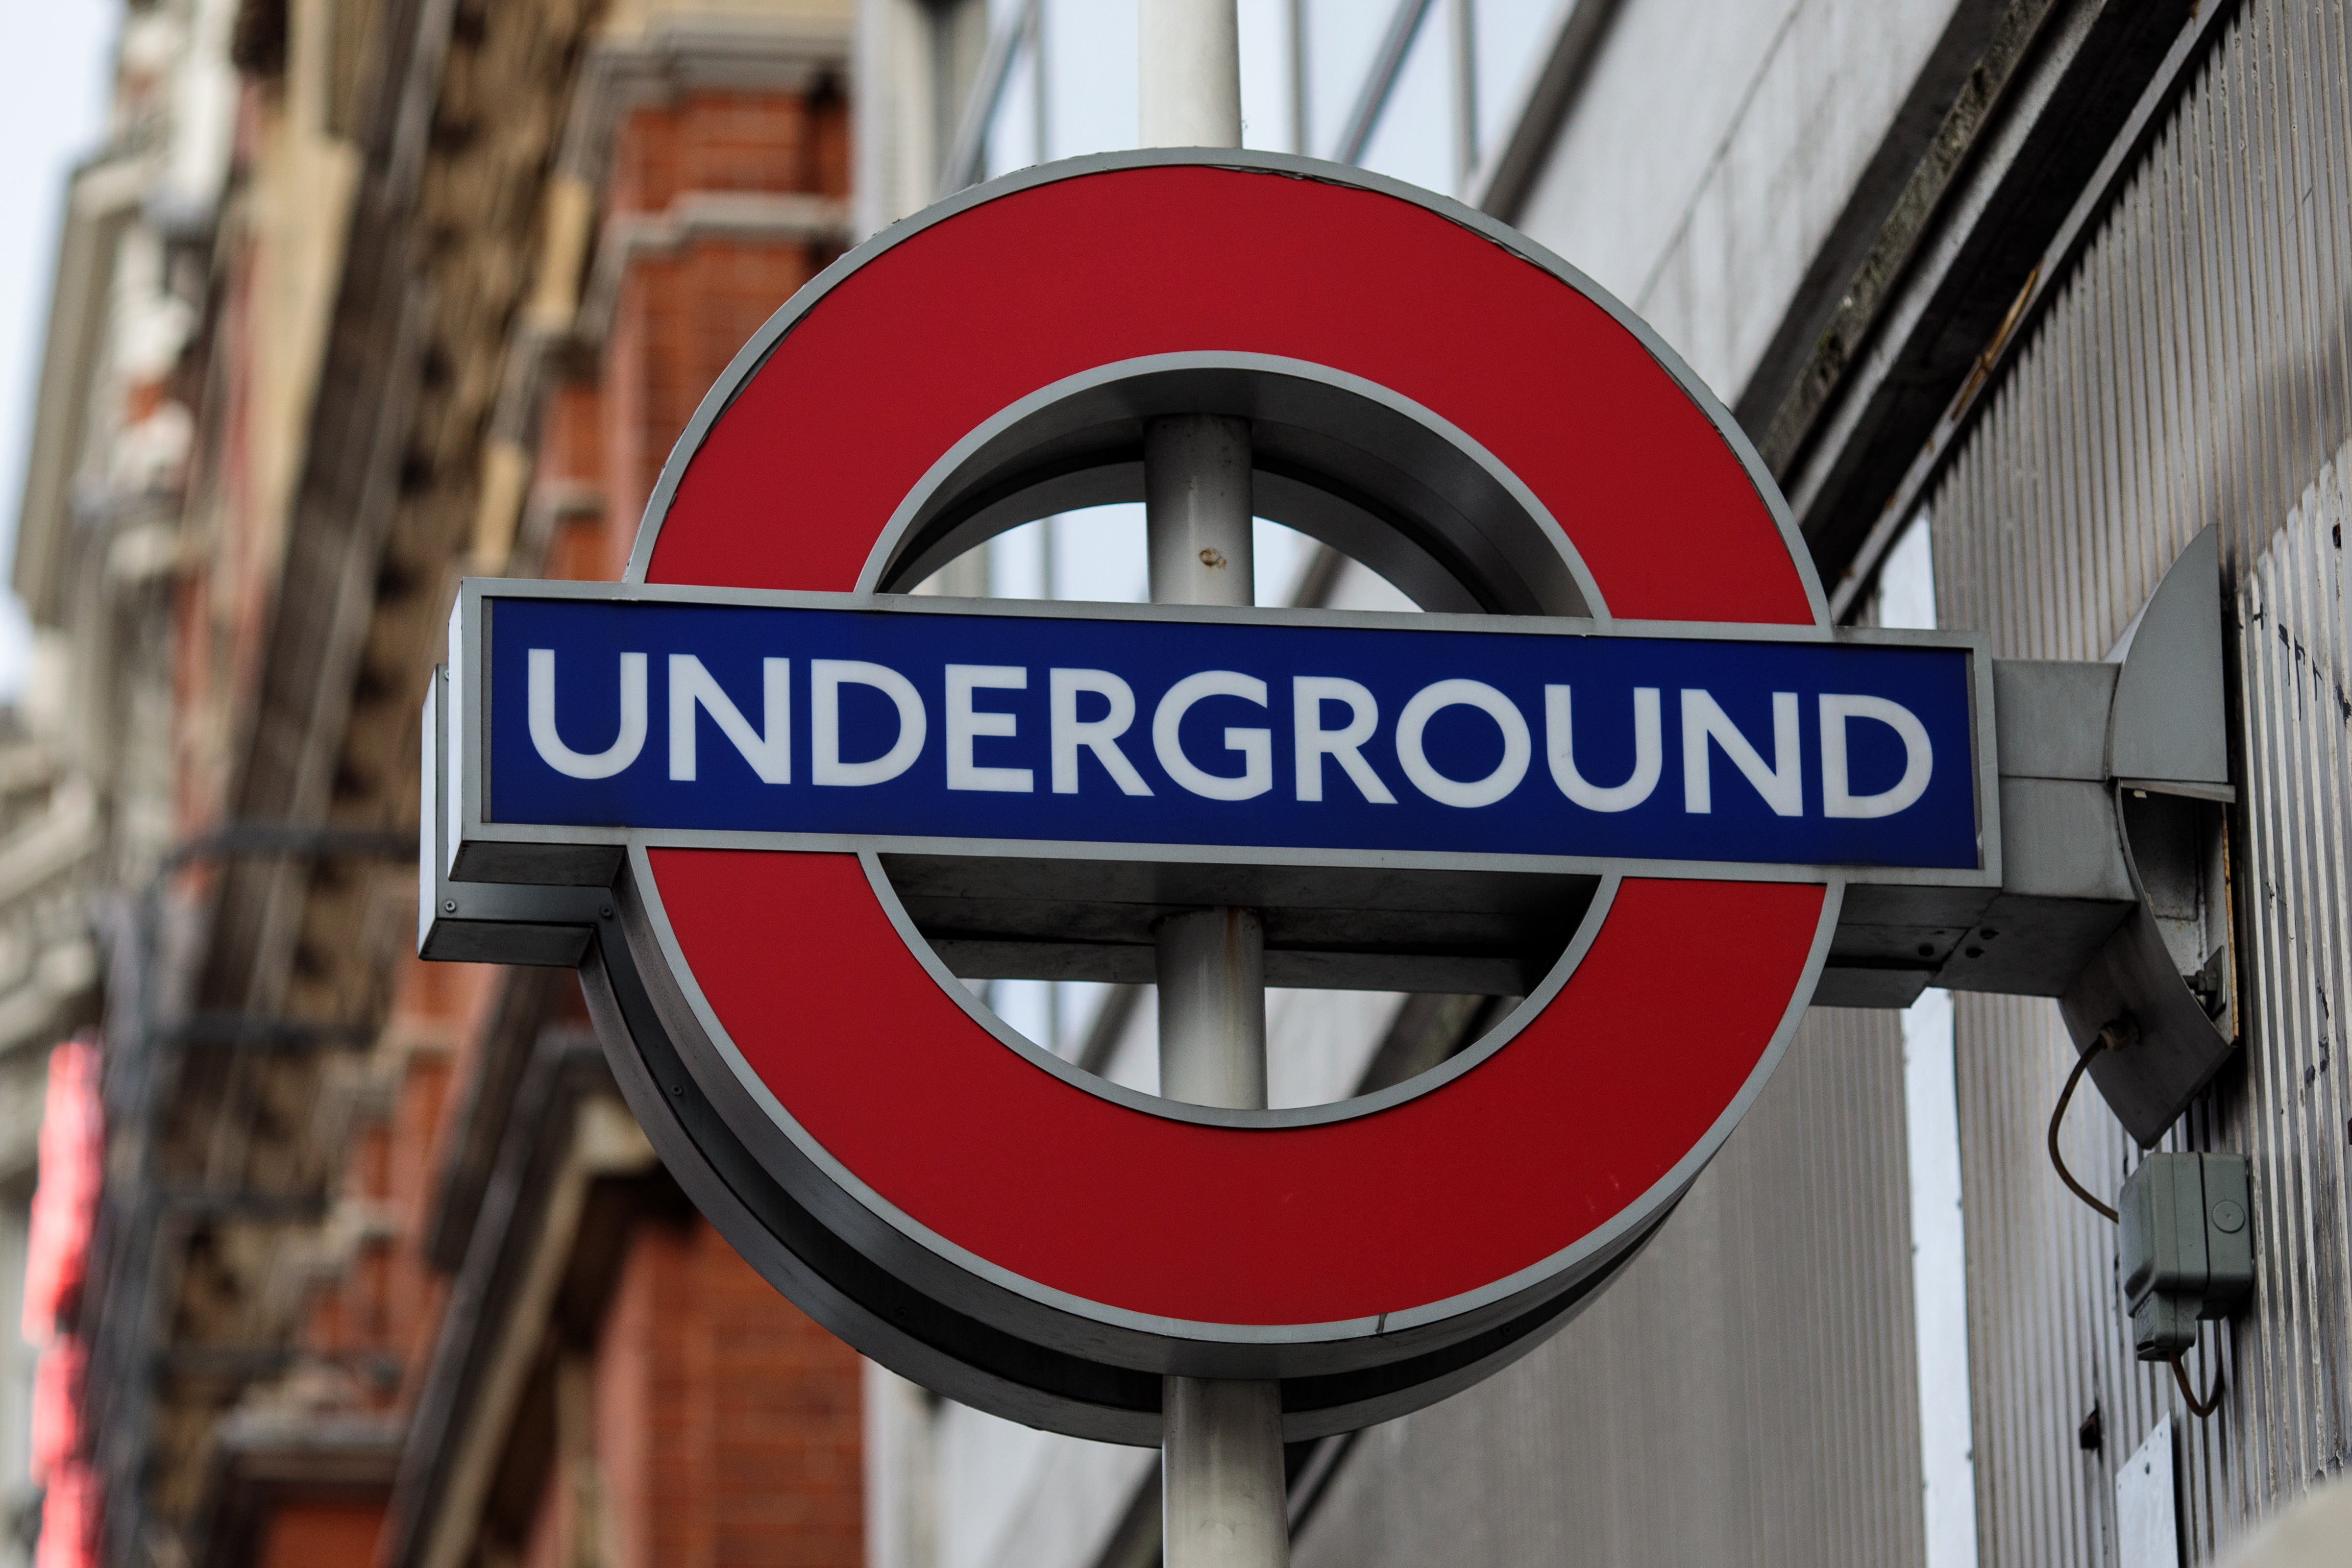 A man has been charged with attempted murder on the London Underground